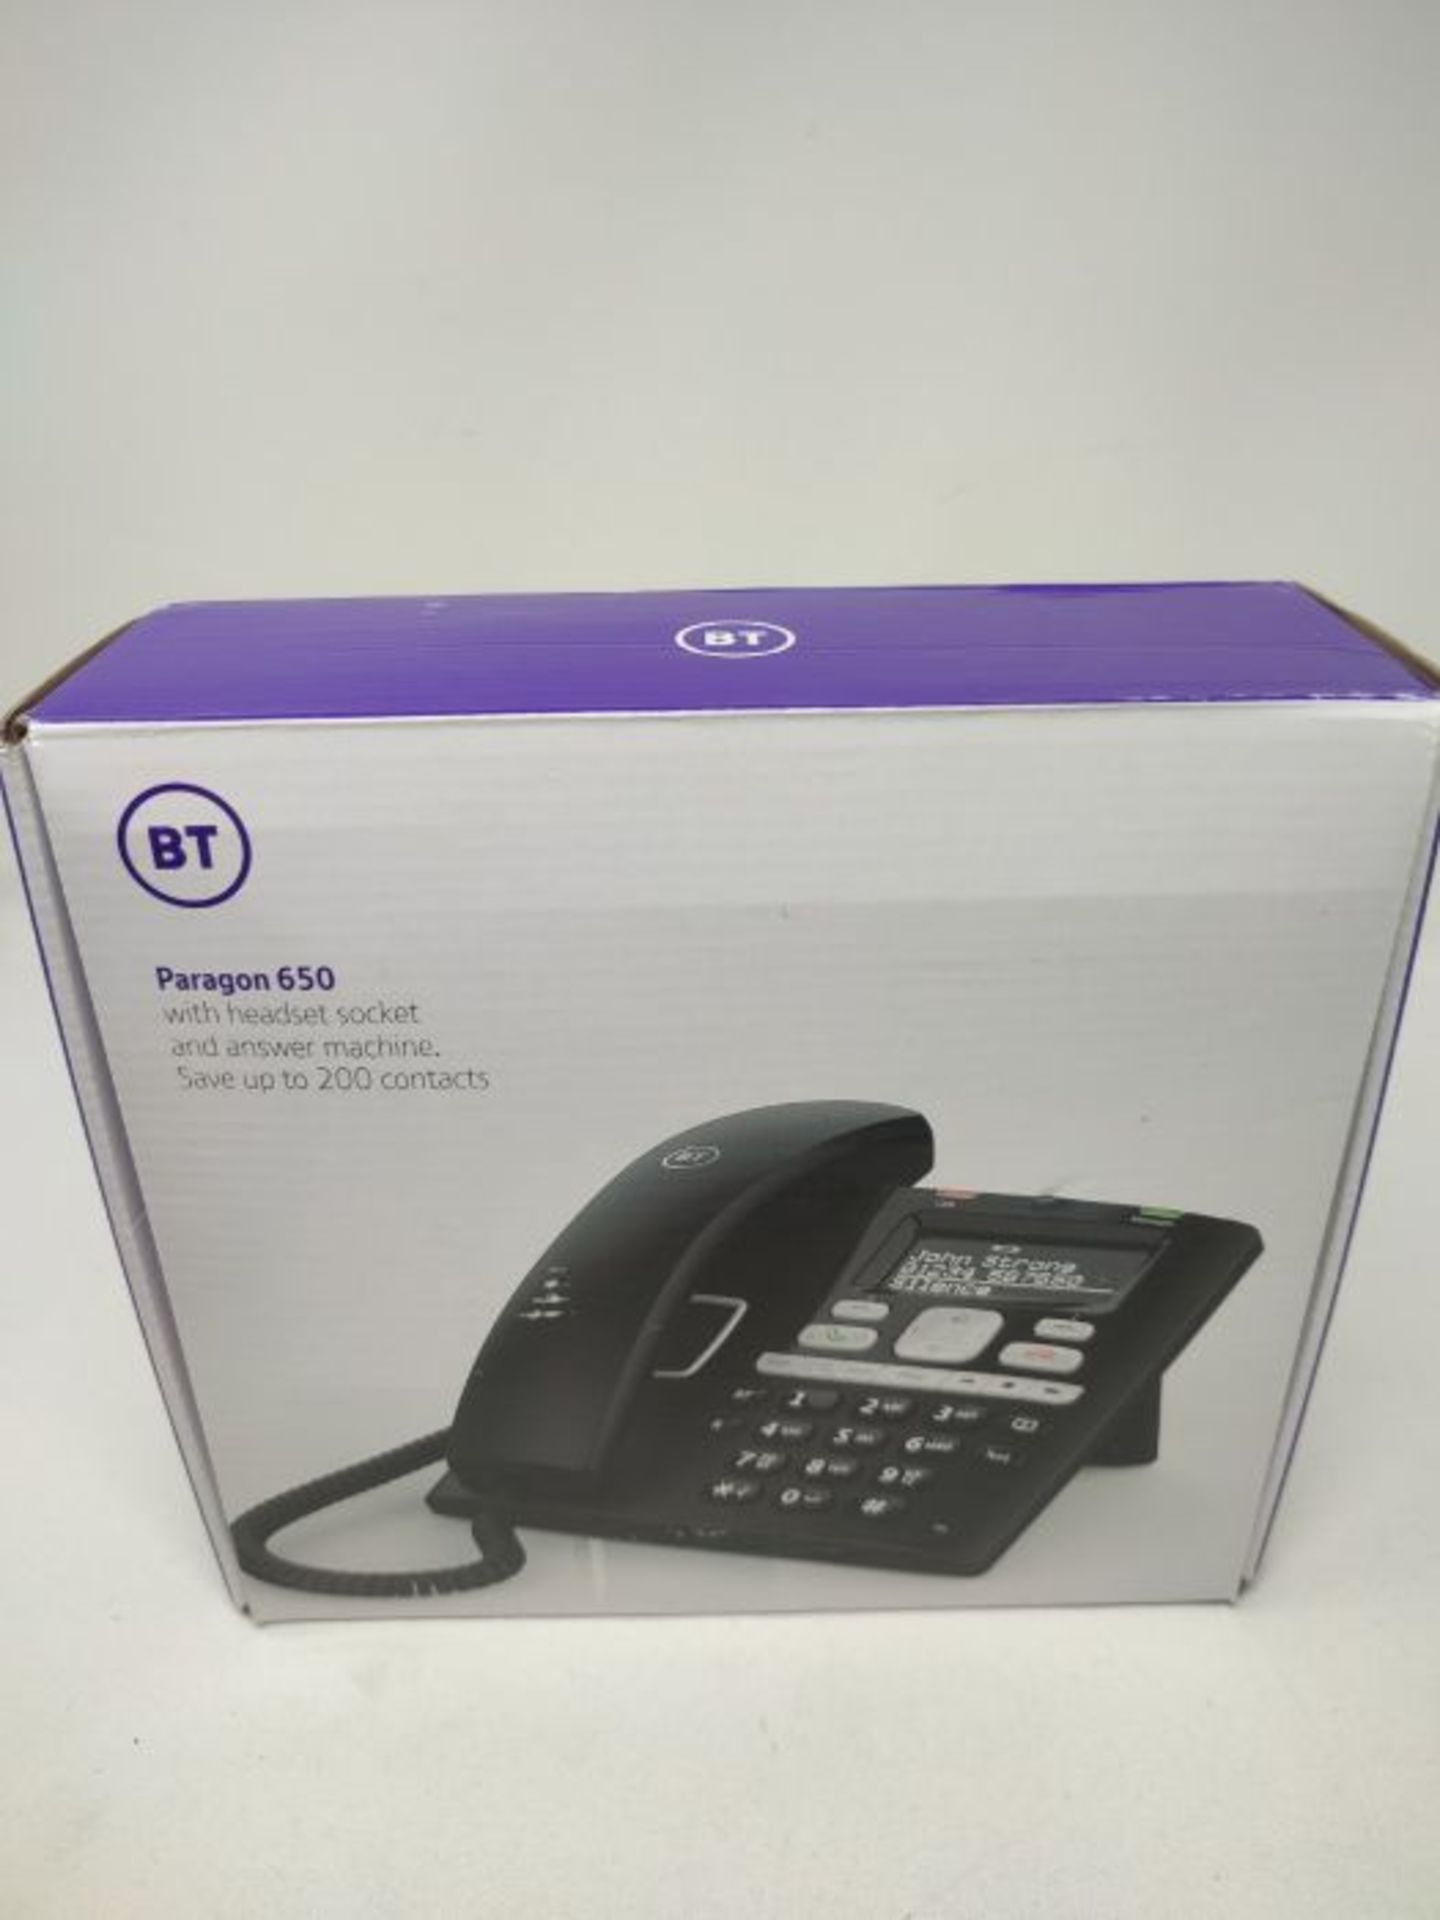 RRP £60.00 BT Paragon 650 Telephone Corded Answer Machine 200 Memories SMS Caller Inverse Display - Image 2 of 3